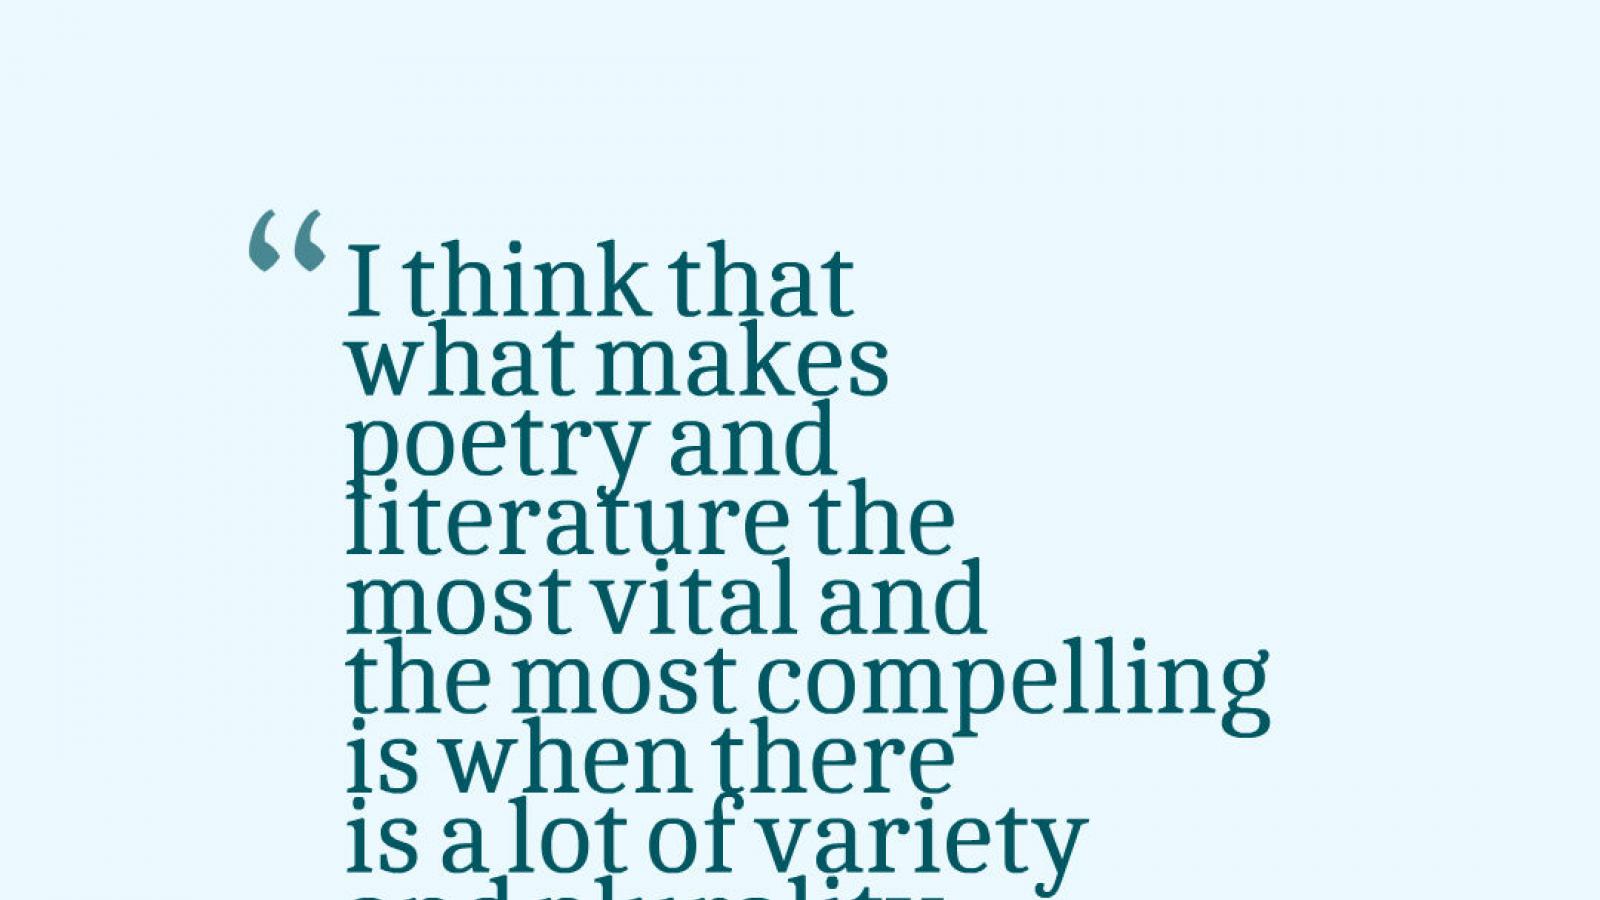 Quote that reads, I think that what makes poetry and literature the most vital and the most compelling is when there is a lot  all writing the same poem, what’s the point?of variety and plurality. Because if we’re